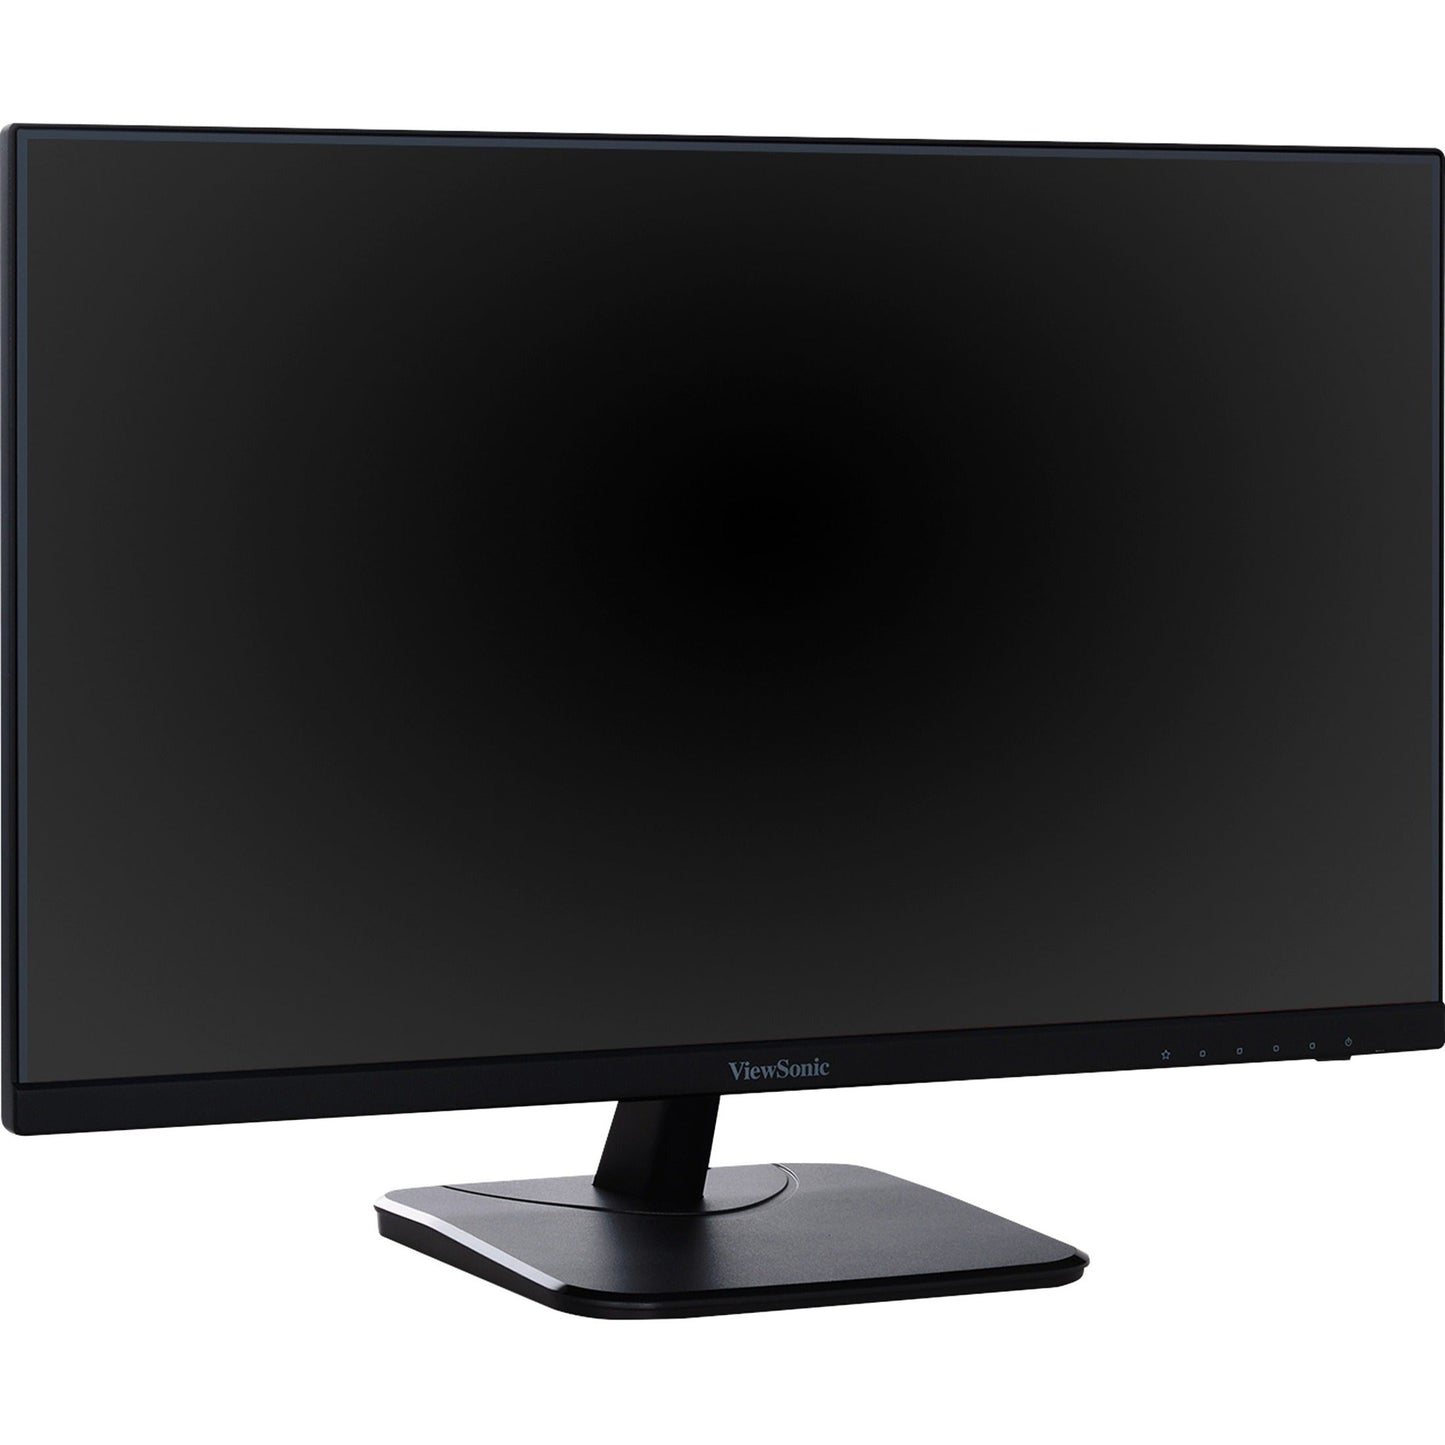 ViewSonic VA2456-MHD 24 Inch IPS 1080p Monitor with Ultra-Thin Bezels HDMI DisplayPort and VGA Inputs for Home and Office